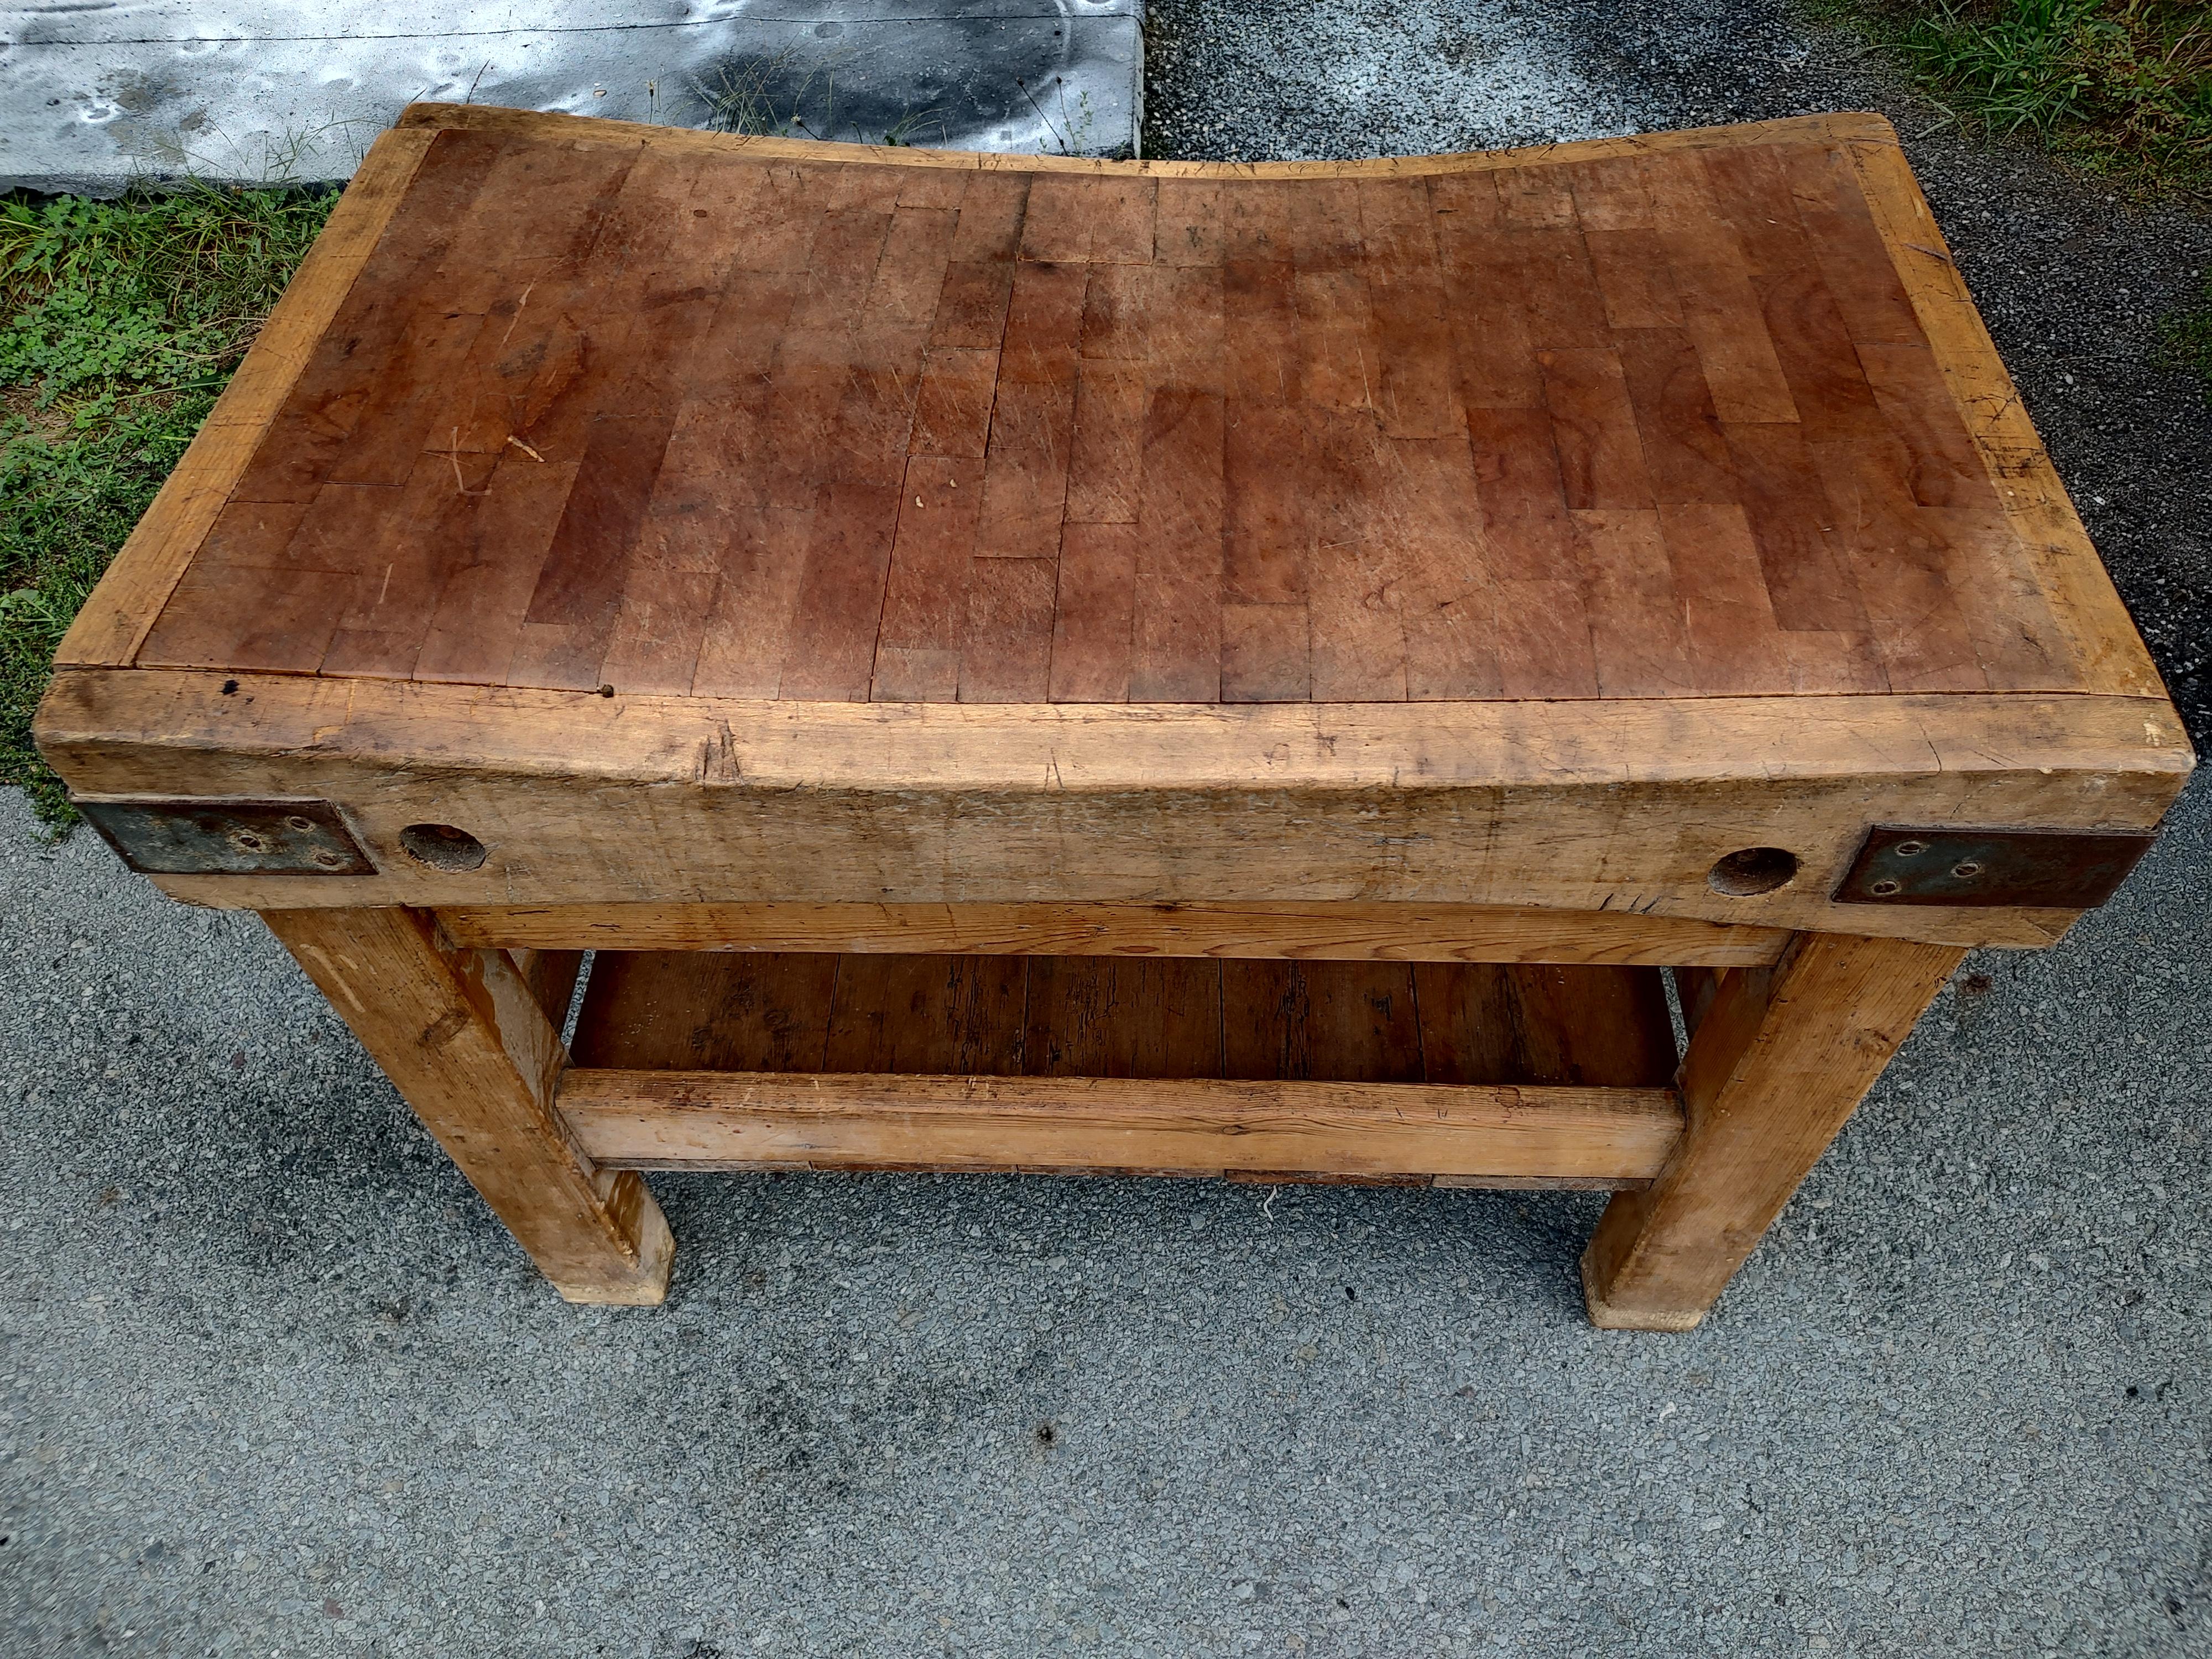 Hand-Crafted 19th Century Industrial Butcher Block Table with Lower Shelf from England